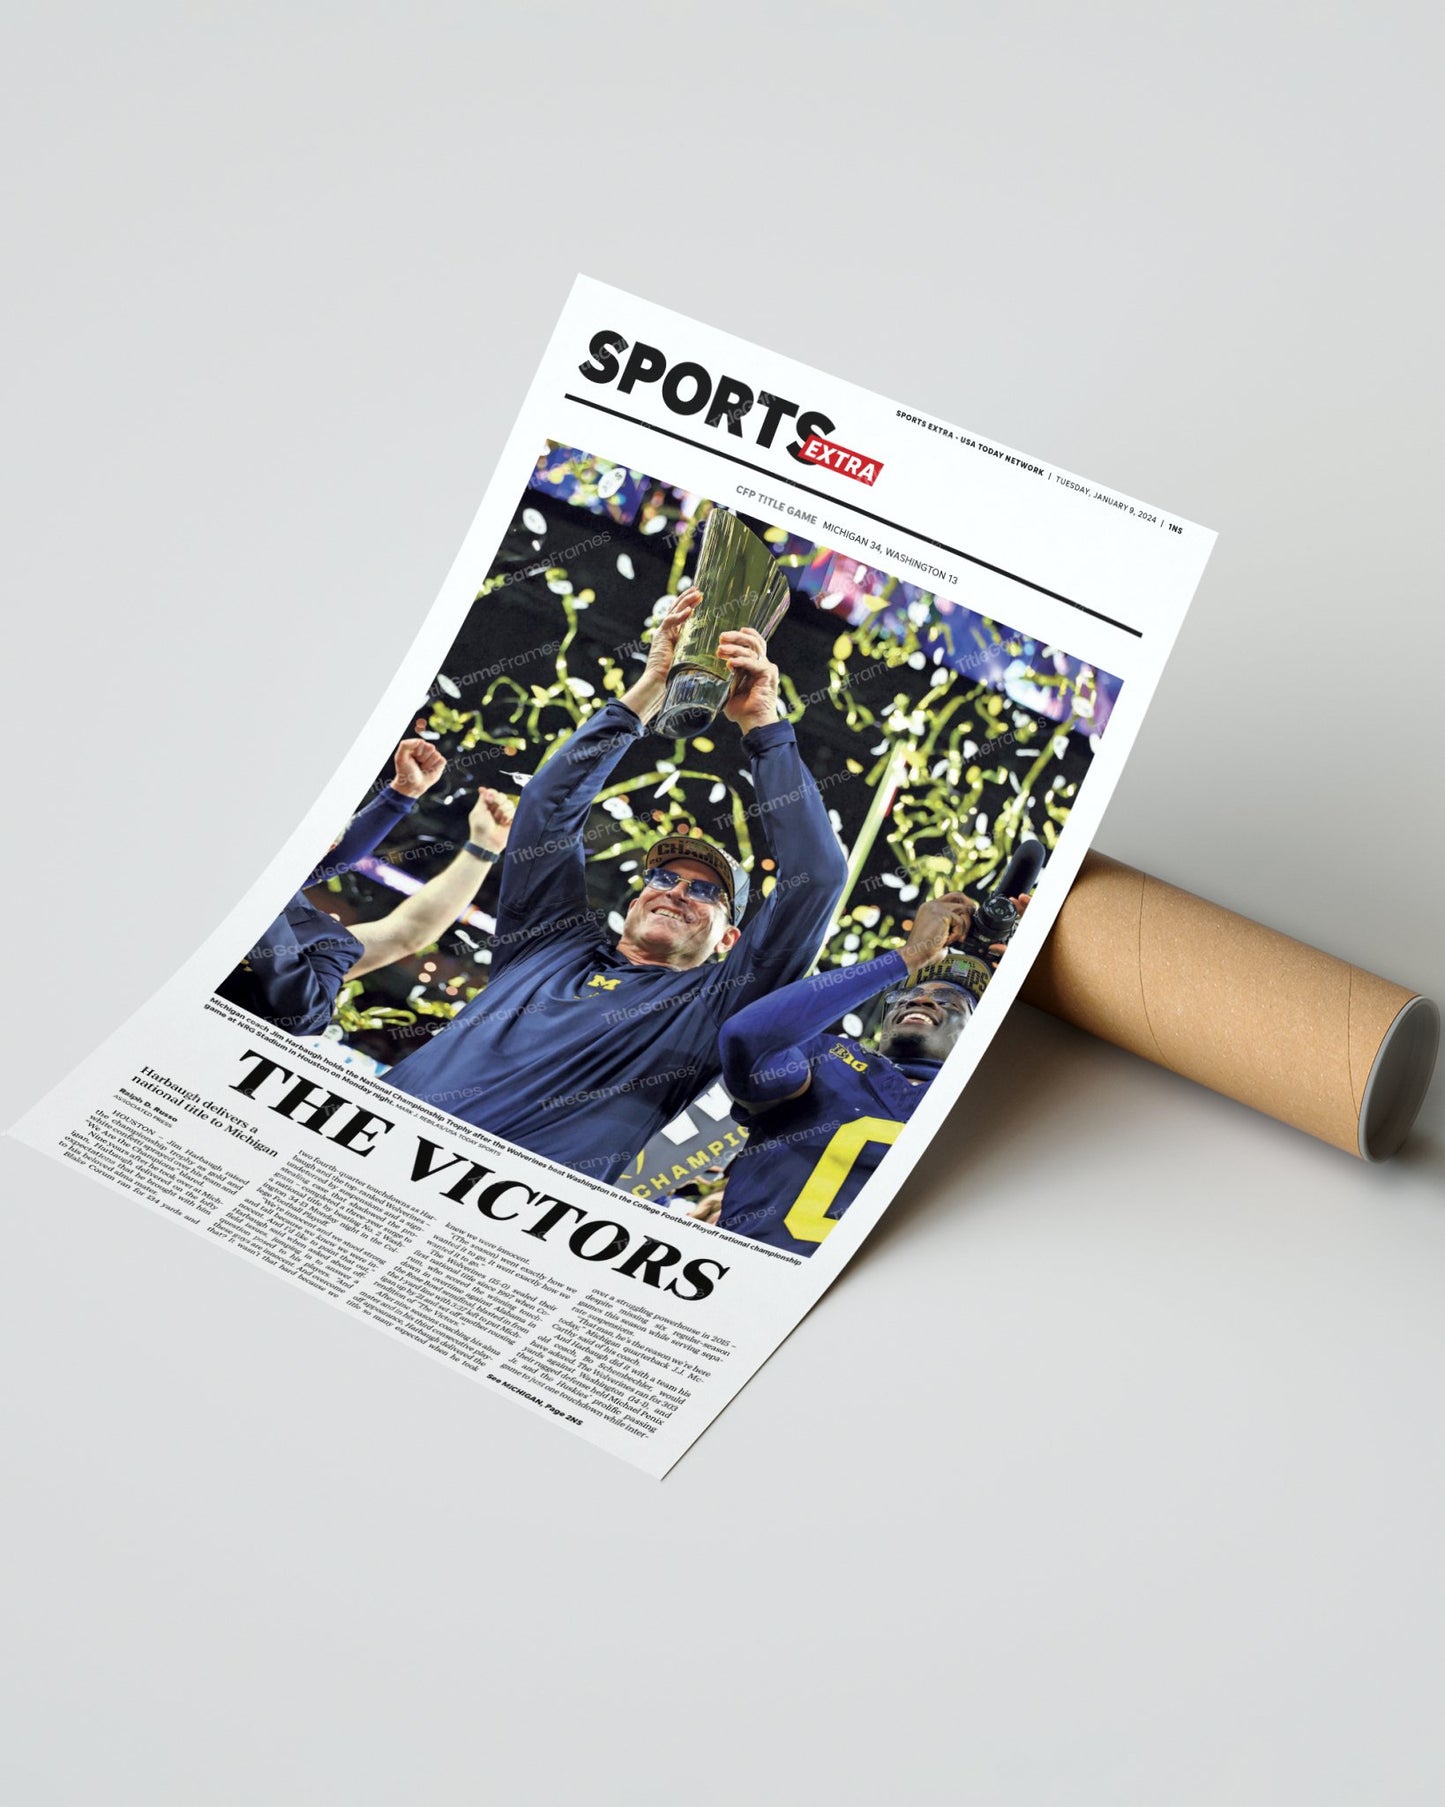 2024 Michigan Wolverines National Championship: 'THE VICTORS' - Framed Newspaper Print - Title Game Frames